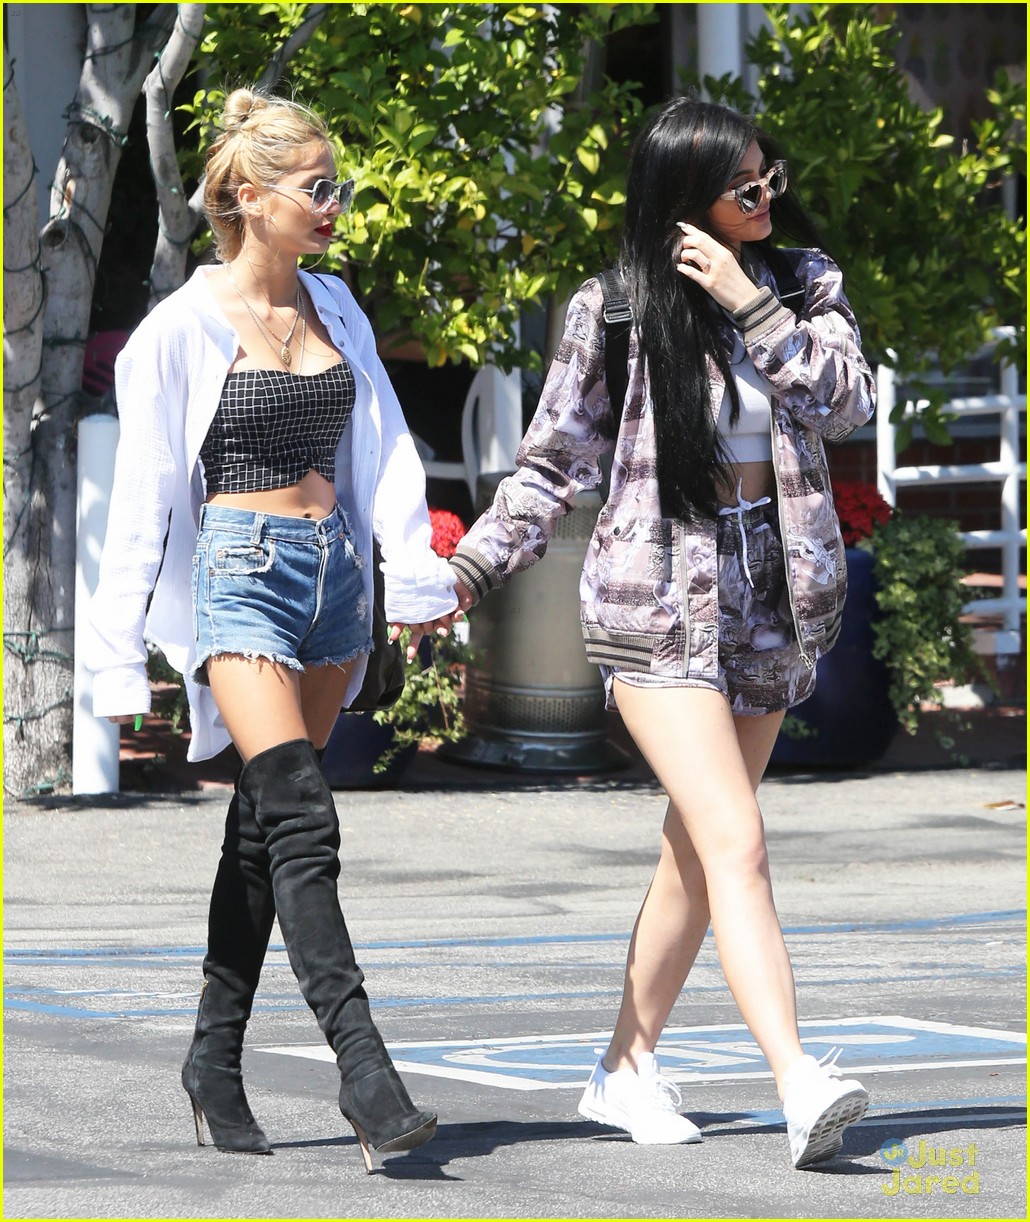 Kylie Jenner & Pia Mia Hold Hands While Shopping with Kendall | Photo ...